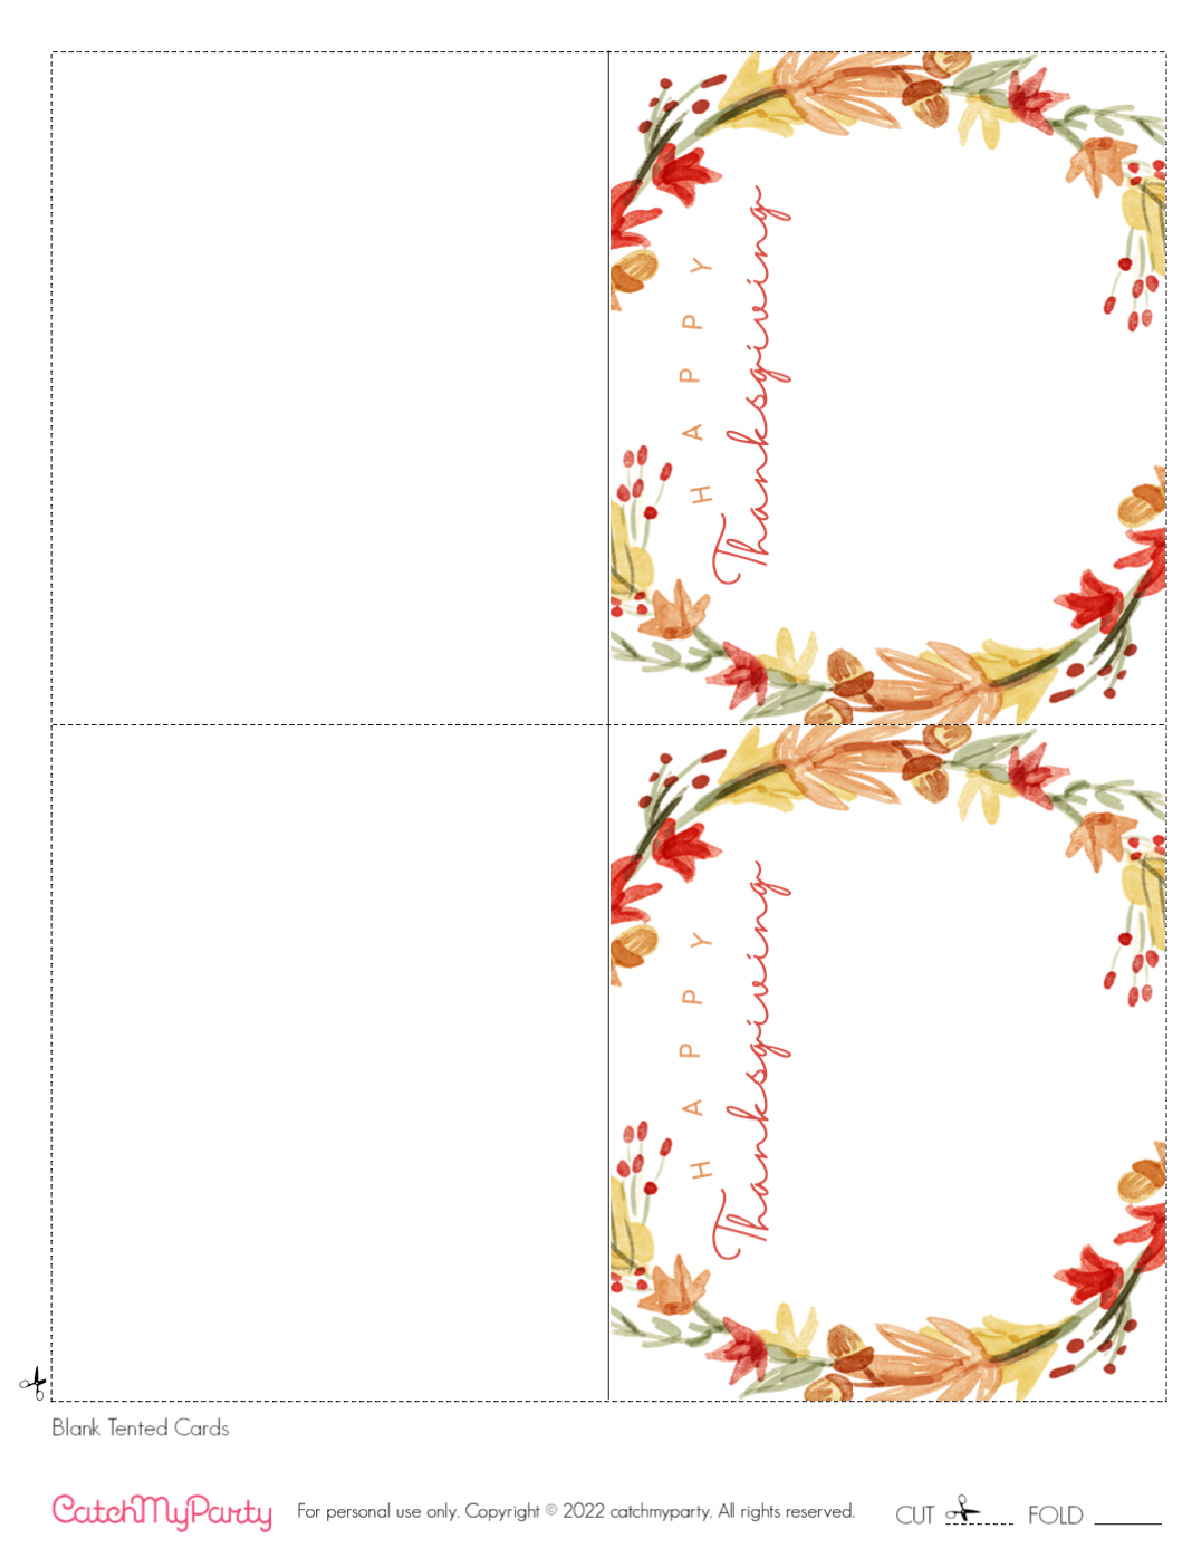 Download these FREE Thanksgiving Printables - Large Thanksgiving Blank Tented Cards